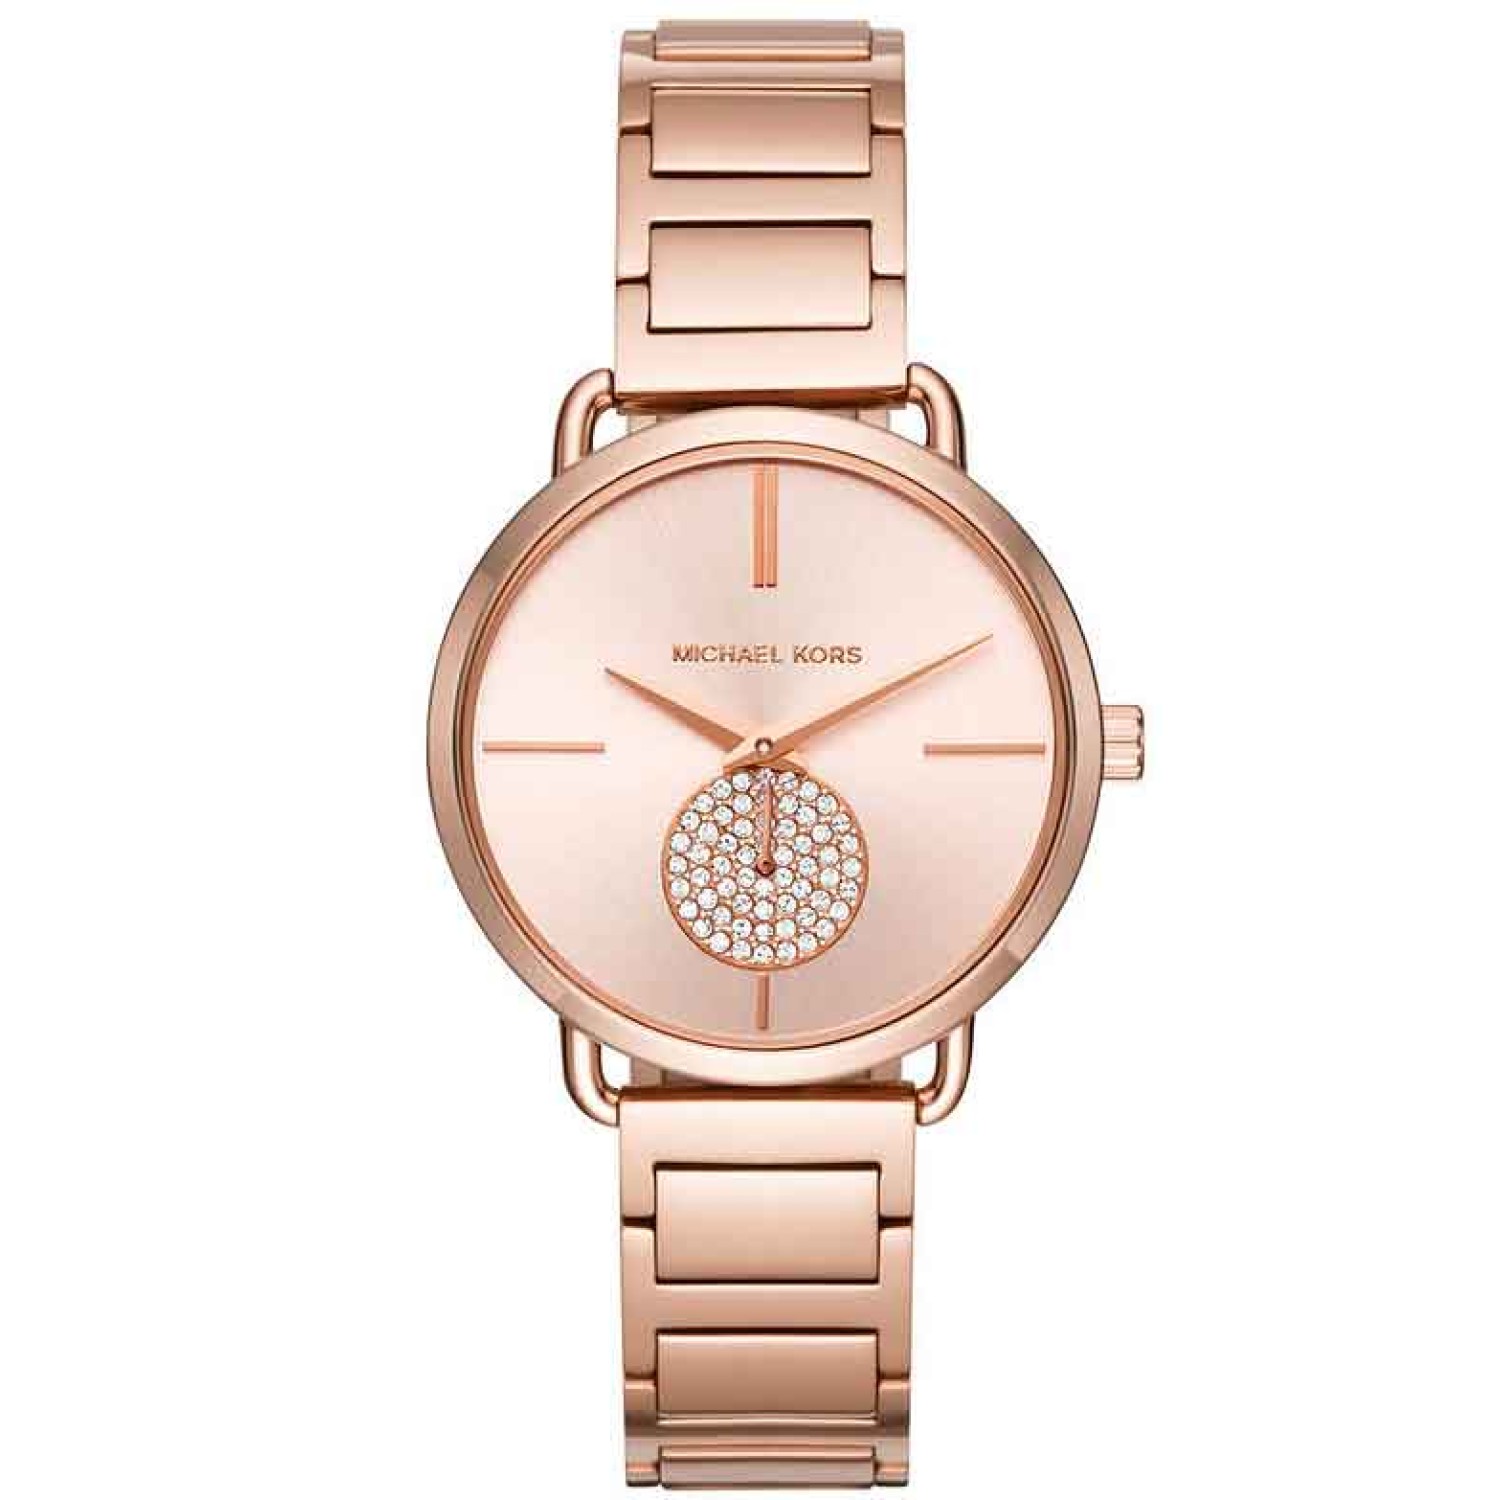 MK3640 Michael Kors Portia Rose Gold-Tone Sub-Eye Watch. The rose gold-tone Michael Kors Portia watch is the face of sleek, modern chic. A minimalist rose gold sunray dial with stick indexes and pavé crystal sixty-second sub-dial shines against a rose gol